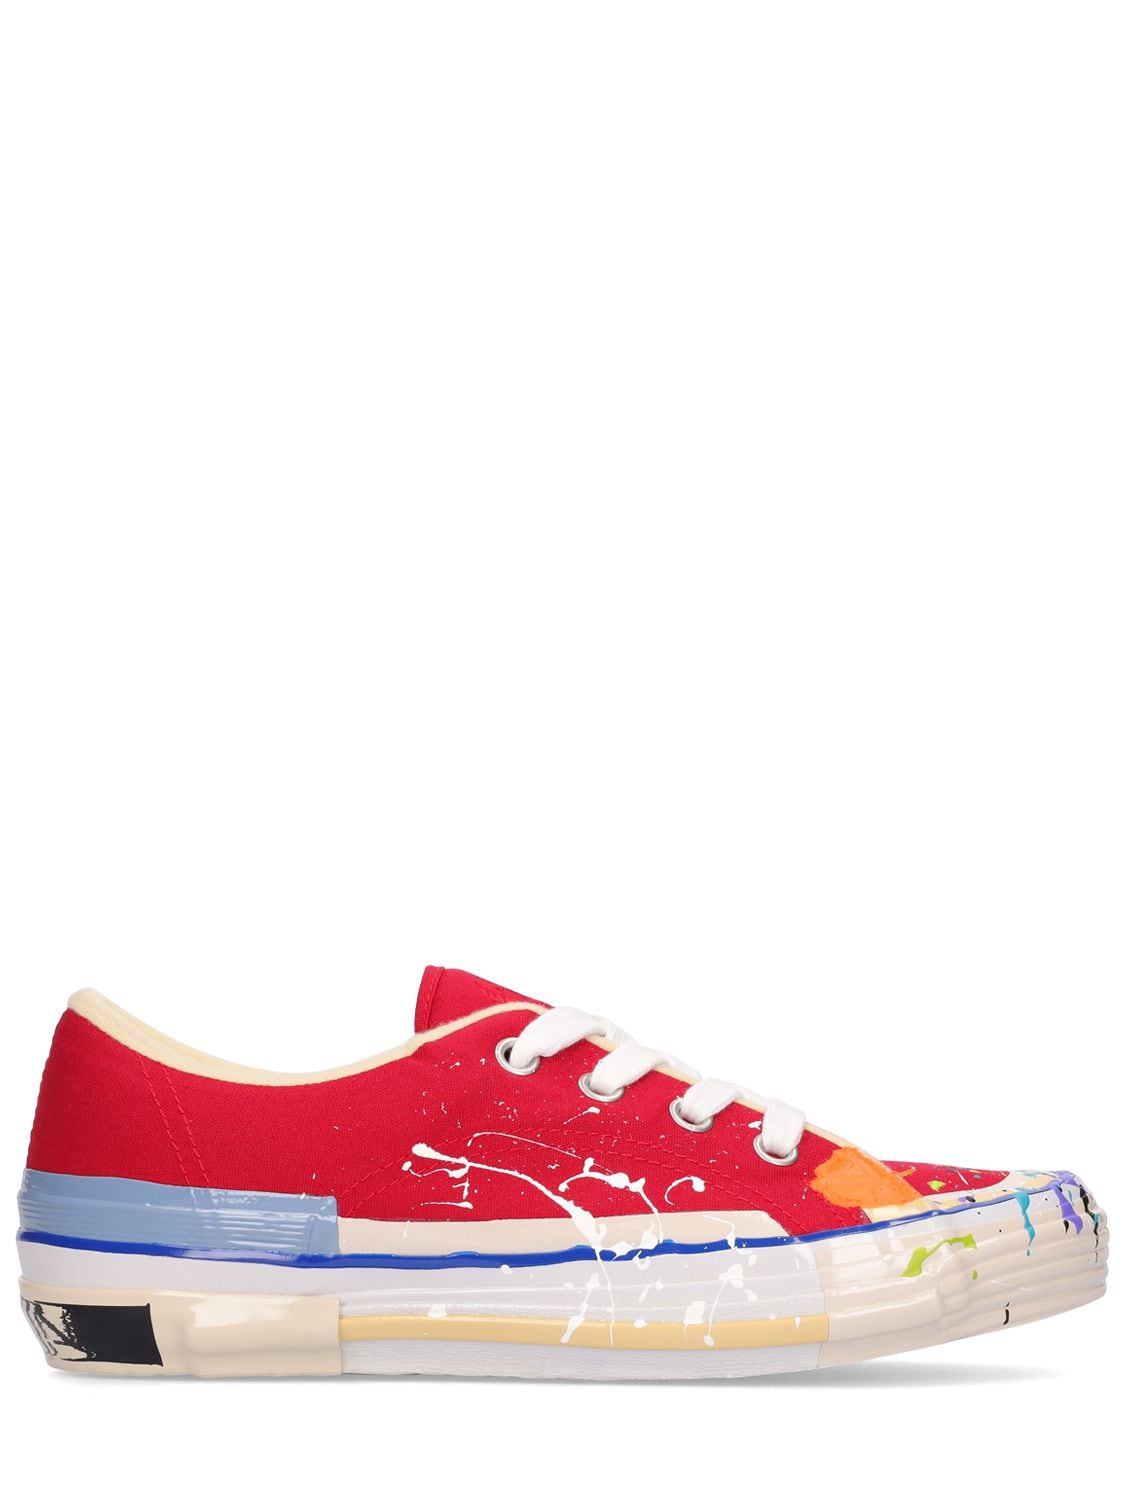 GALLERY DEPT X LANVIN Painted Canvas Sneakers